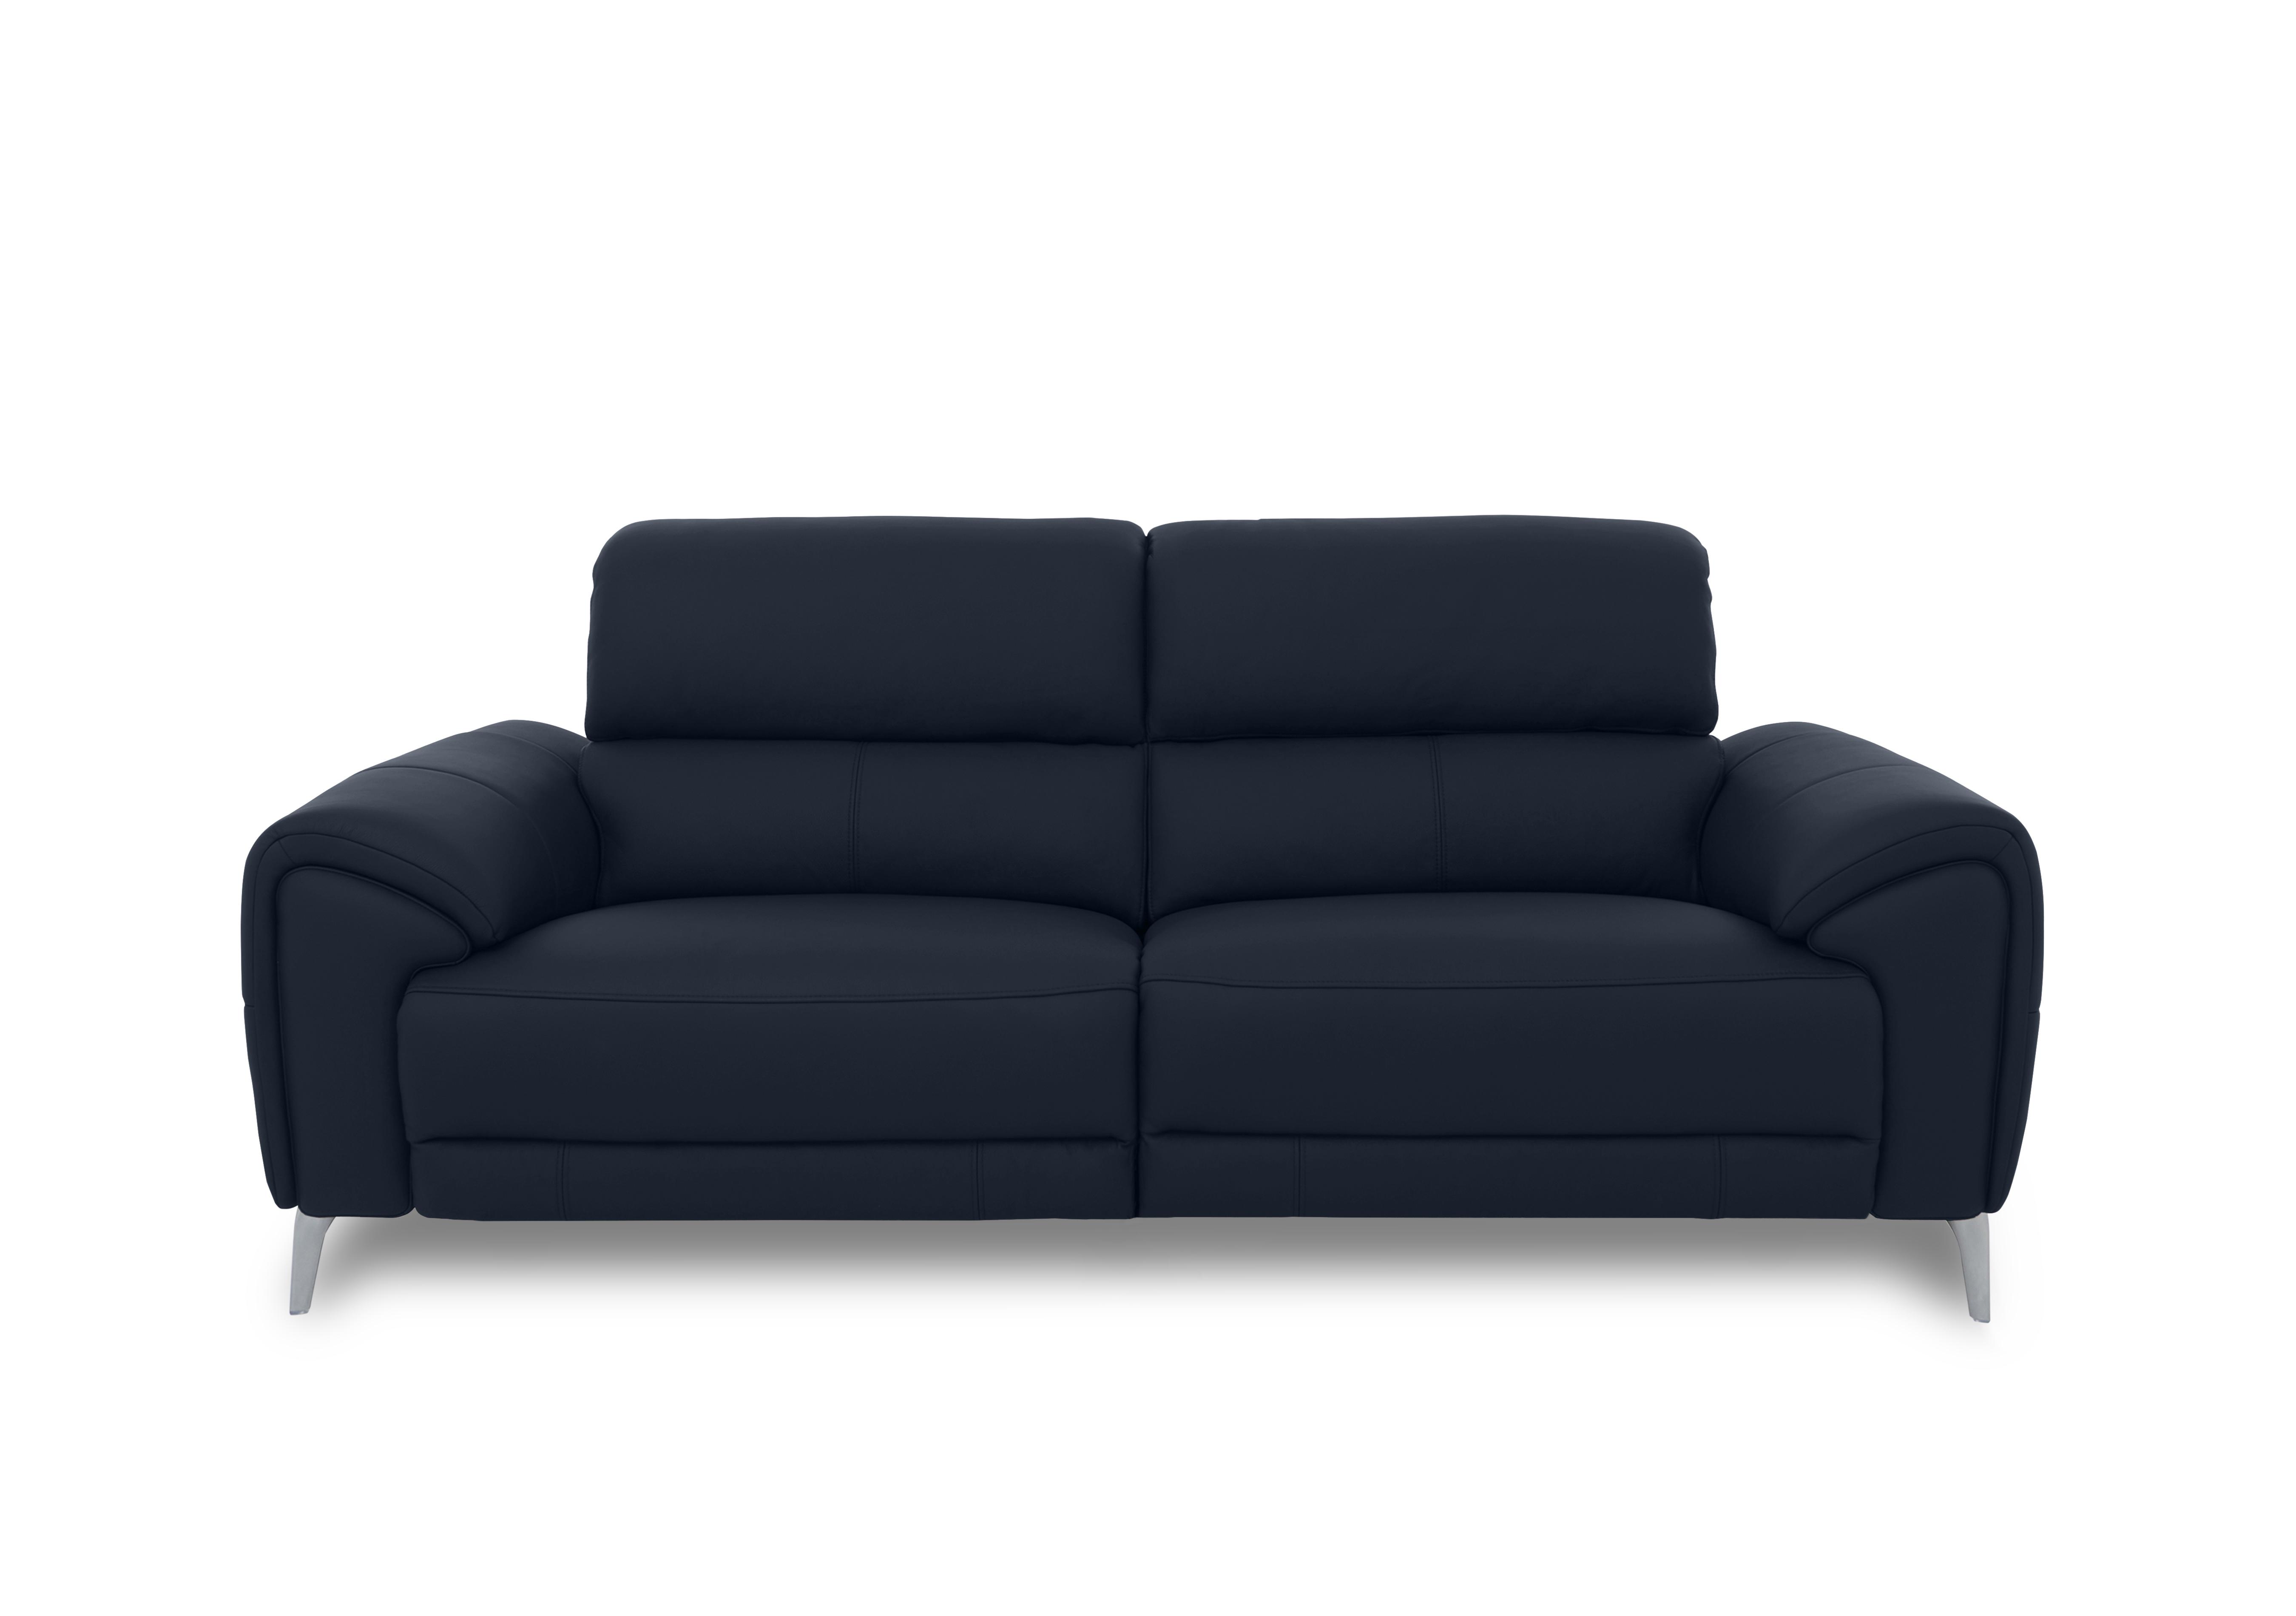 Vino Leather 3 Seater Power Recliner Sofa with Power Headrests and Heated Seats in Cat-40/09 Peacock on Furniture Village